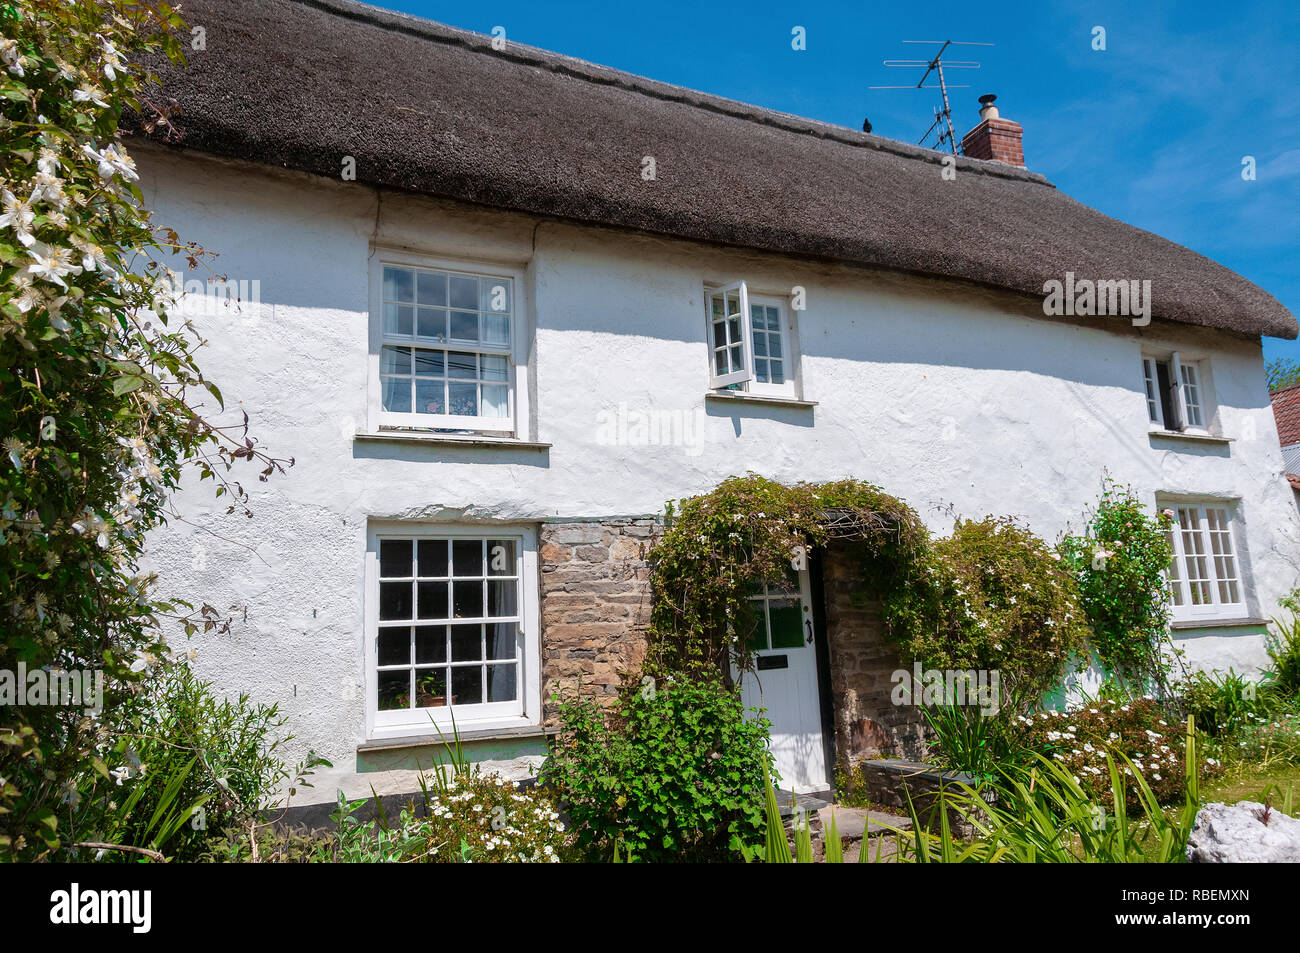 Thatched Cottage In The Coastal Holiday Village Of Croyde In The